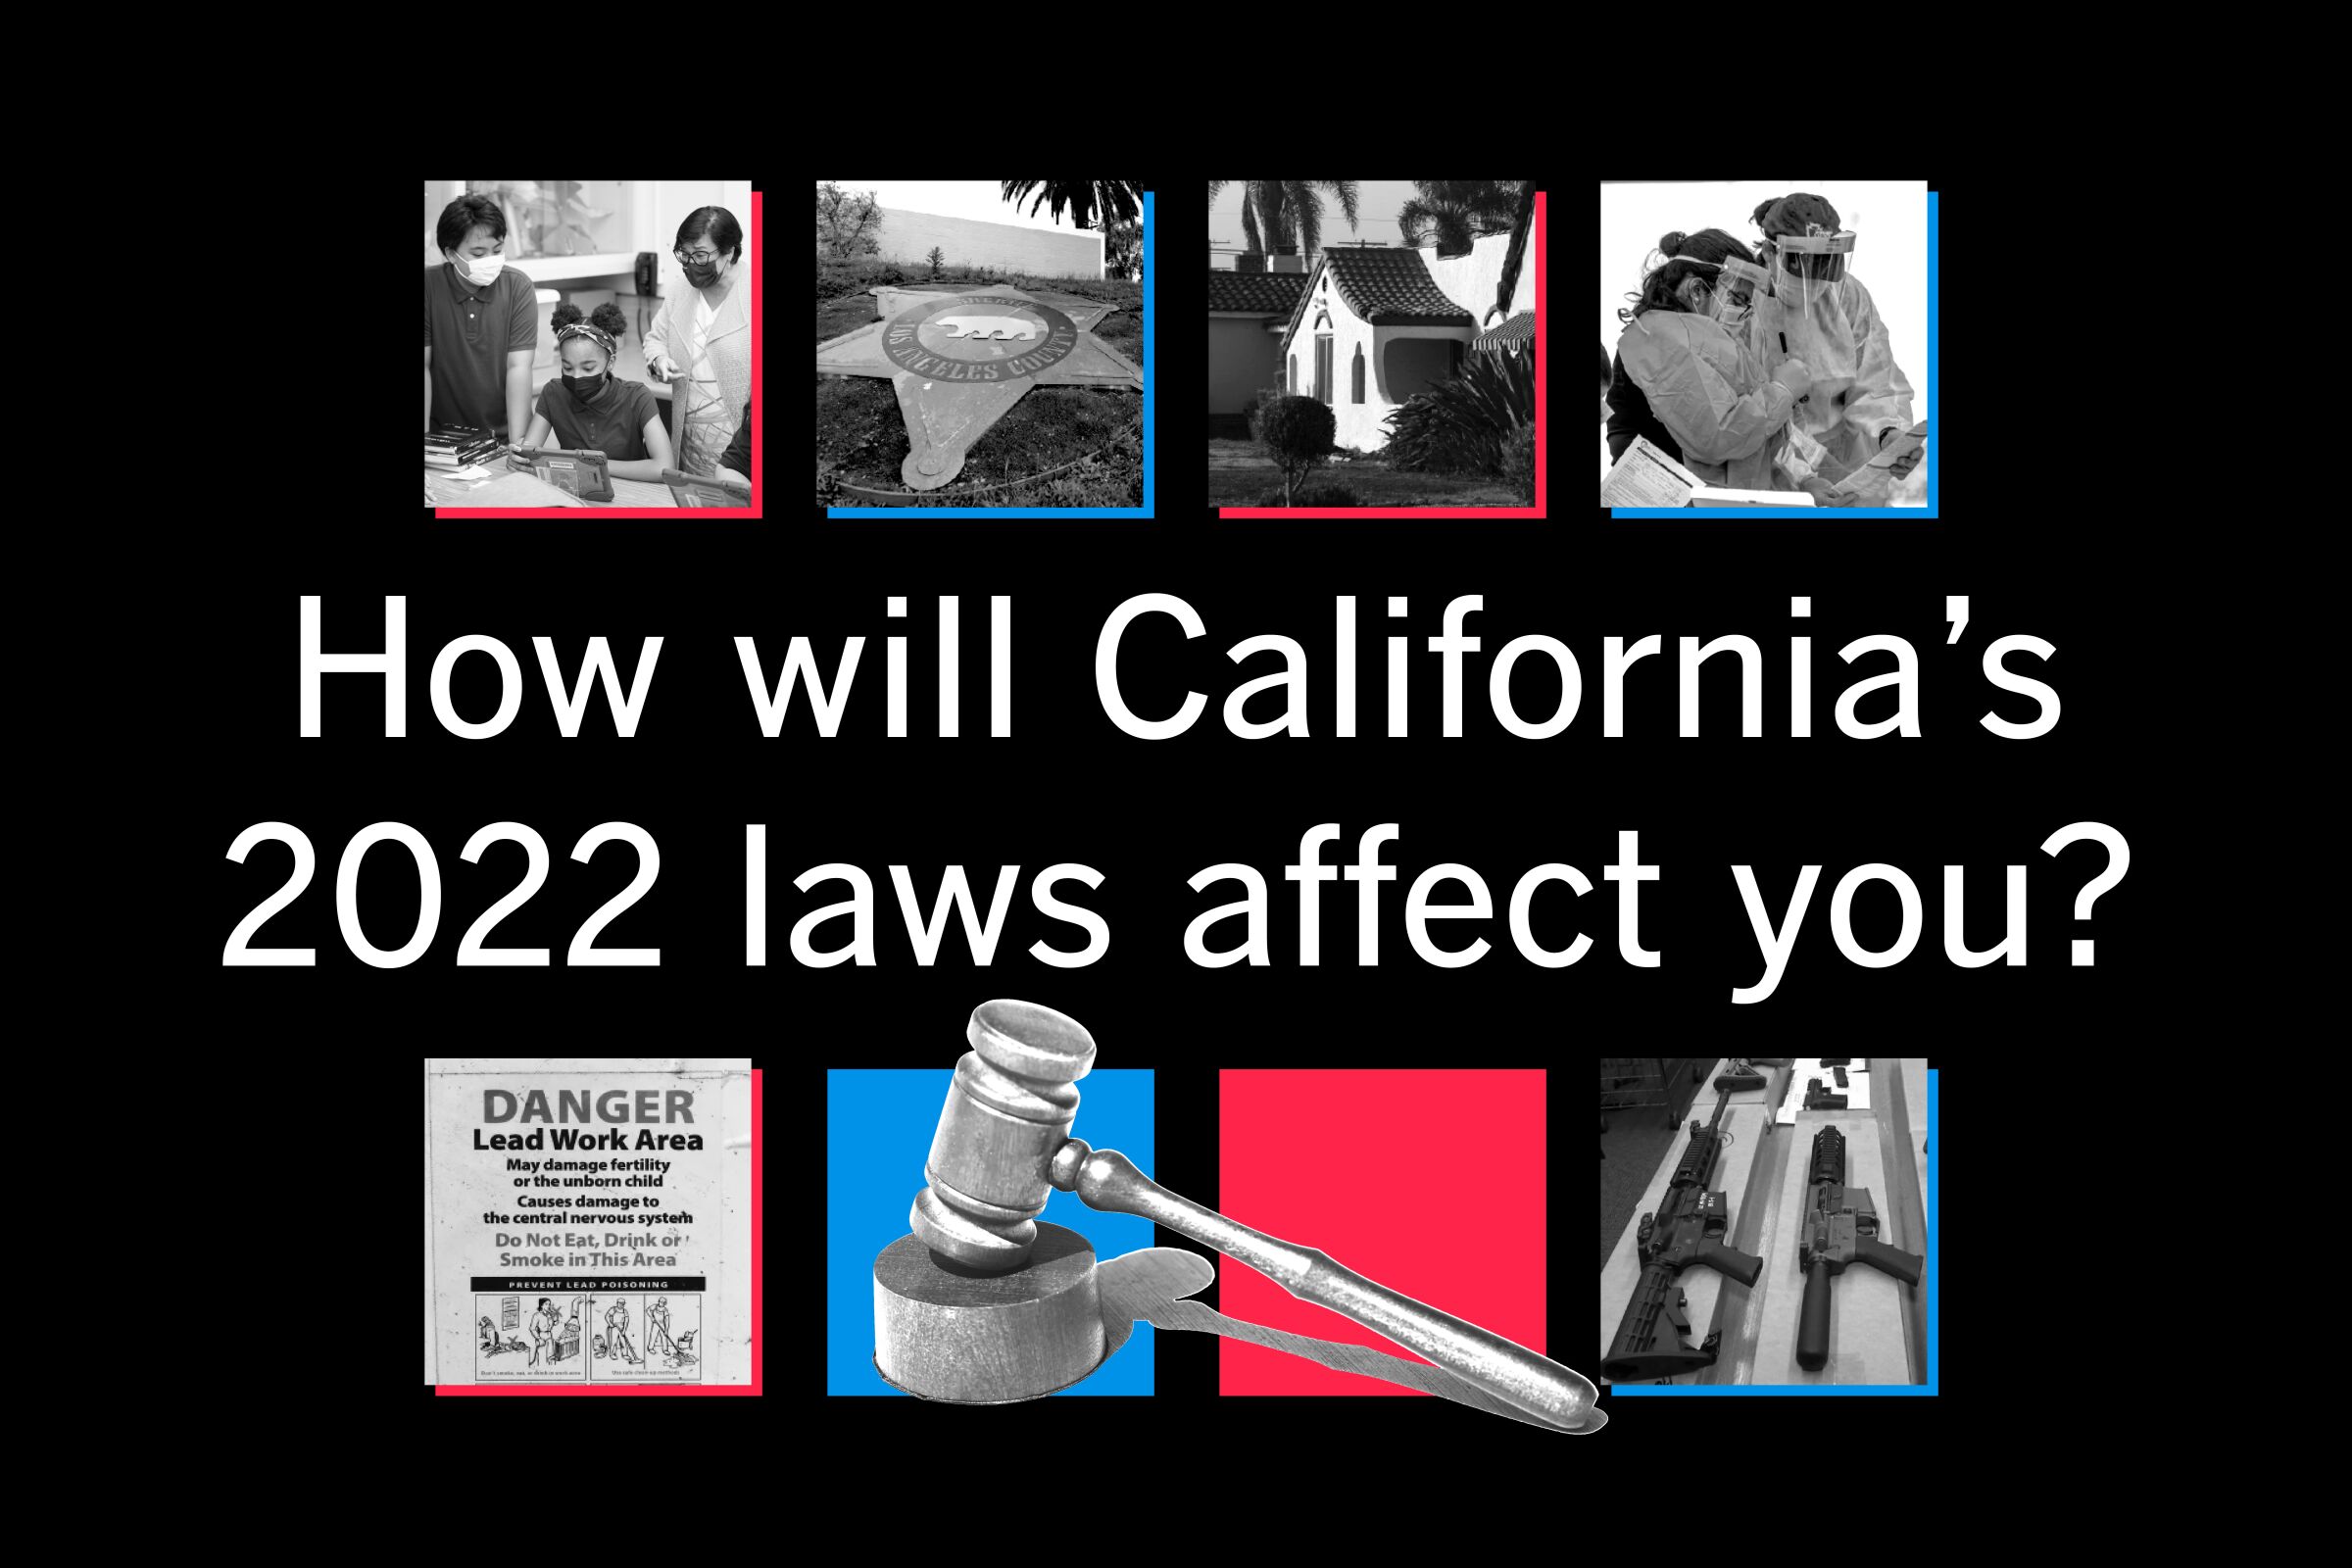 New 2022 California laws on COVID19, housing and policing Los